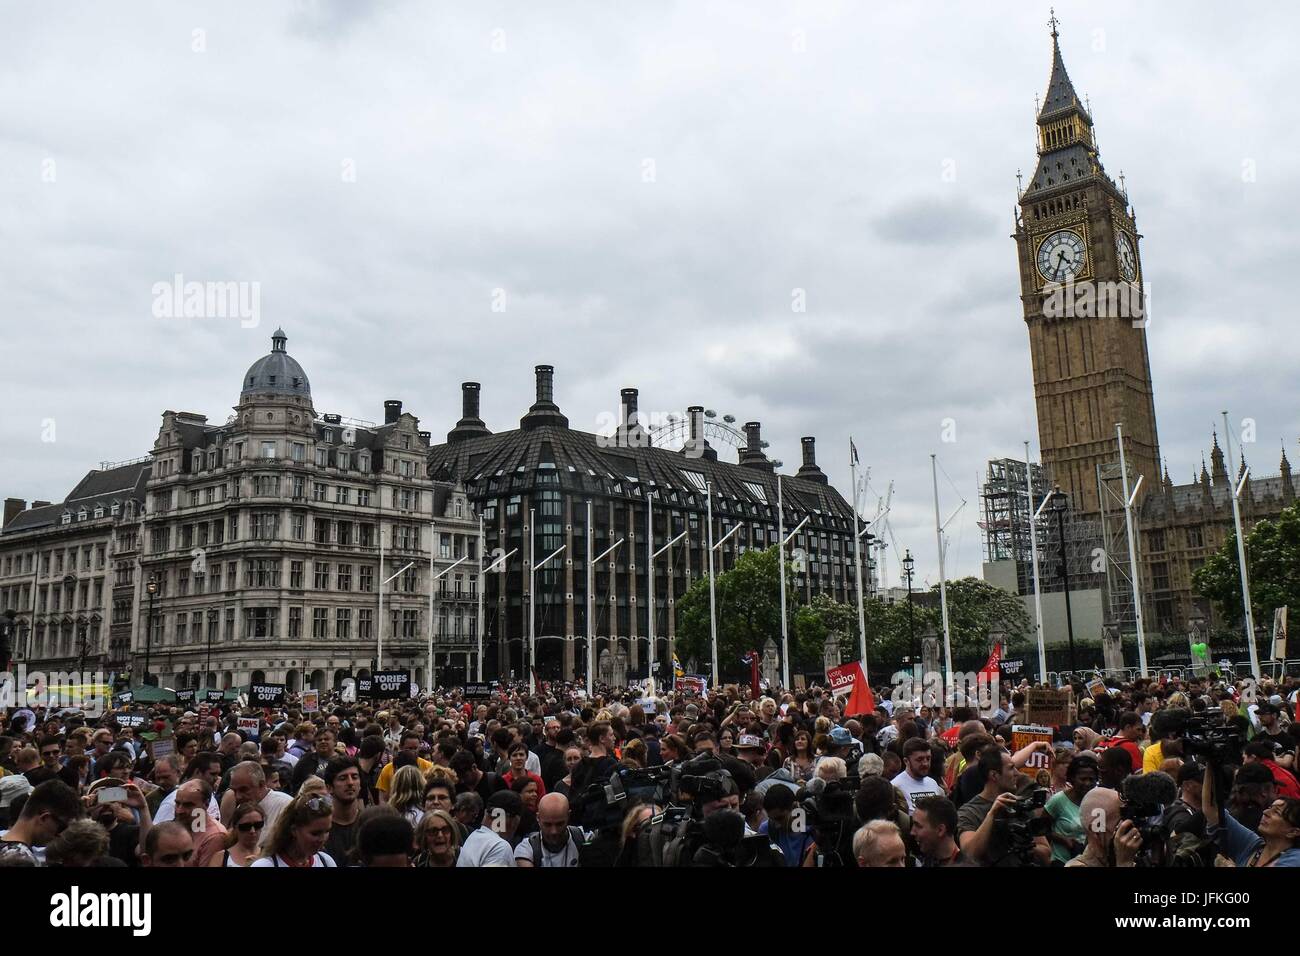 London, UK. 1st July, 2017. Thousands of protesters march through London and rally in Parliament calling for a change in government and an end to austerity. Credit: claire doherty/Alamy Live News Stock Photo